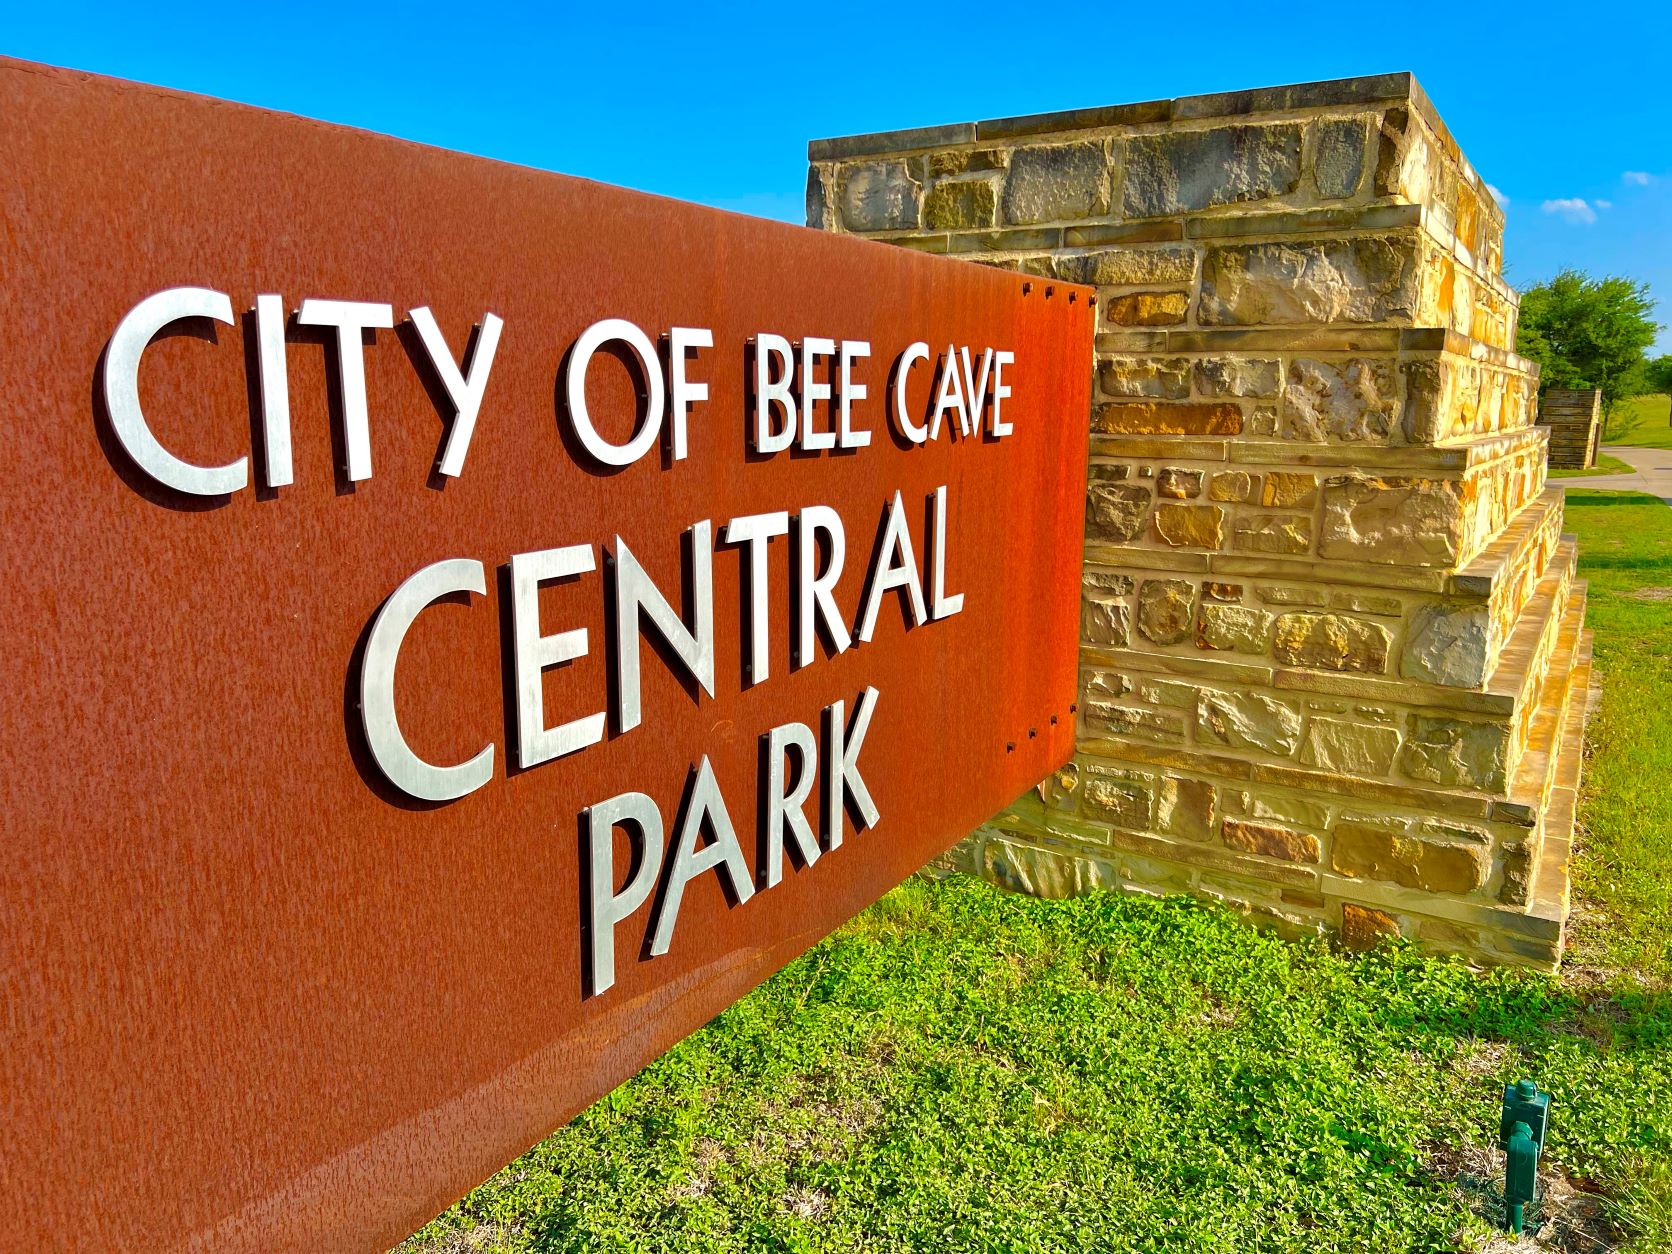   
																Everything You Need to Know About City of Bee Cave Central Park 
															 